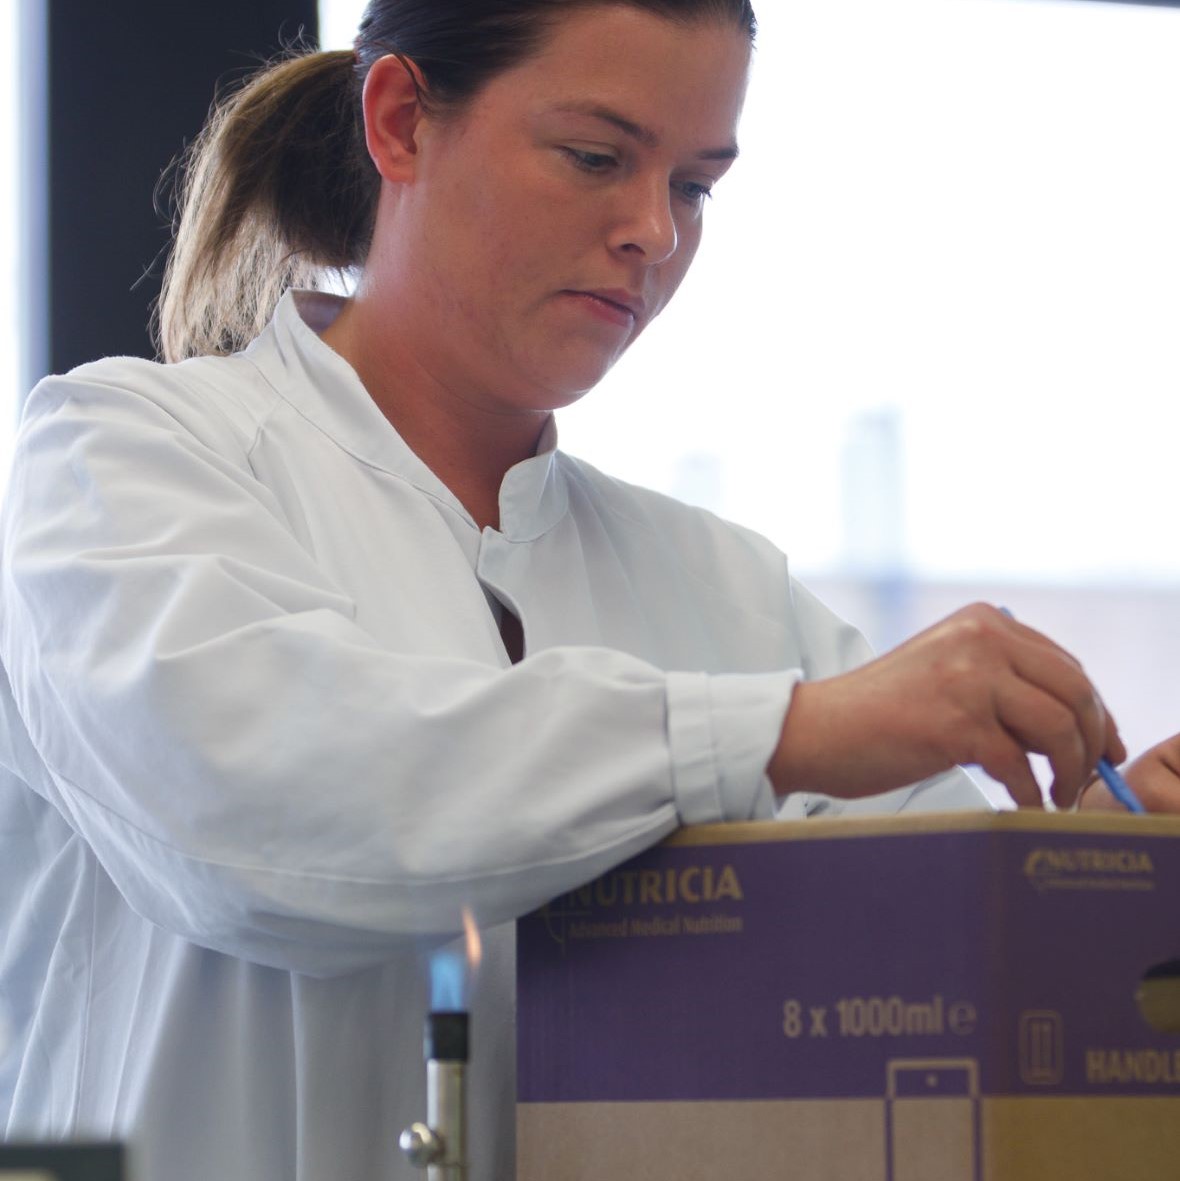 Factory worker with Nutricia box at Zoetermeer Supply Point